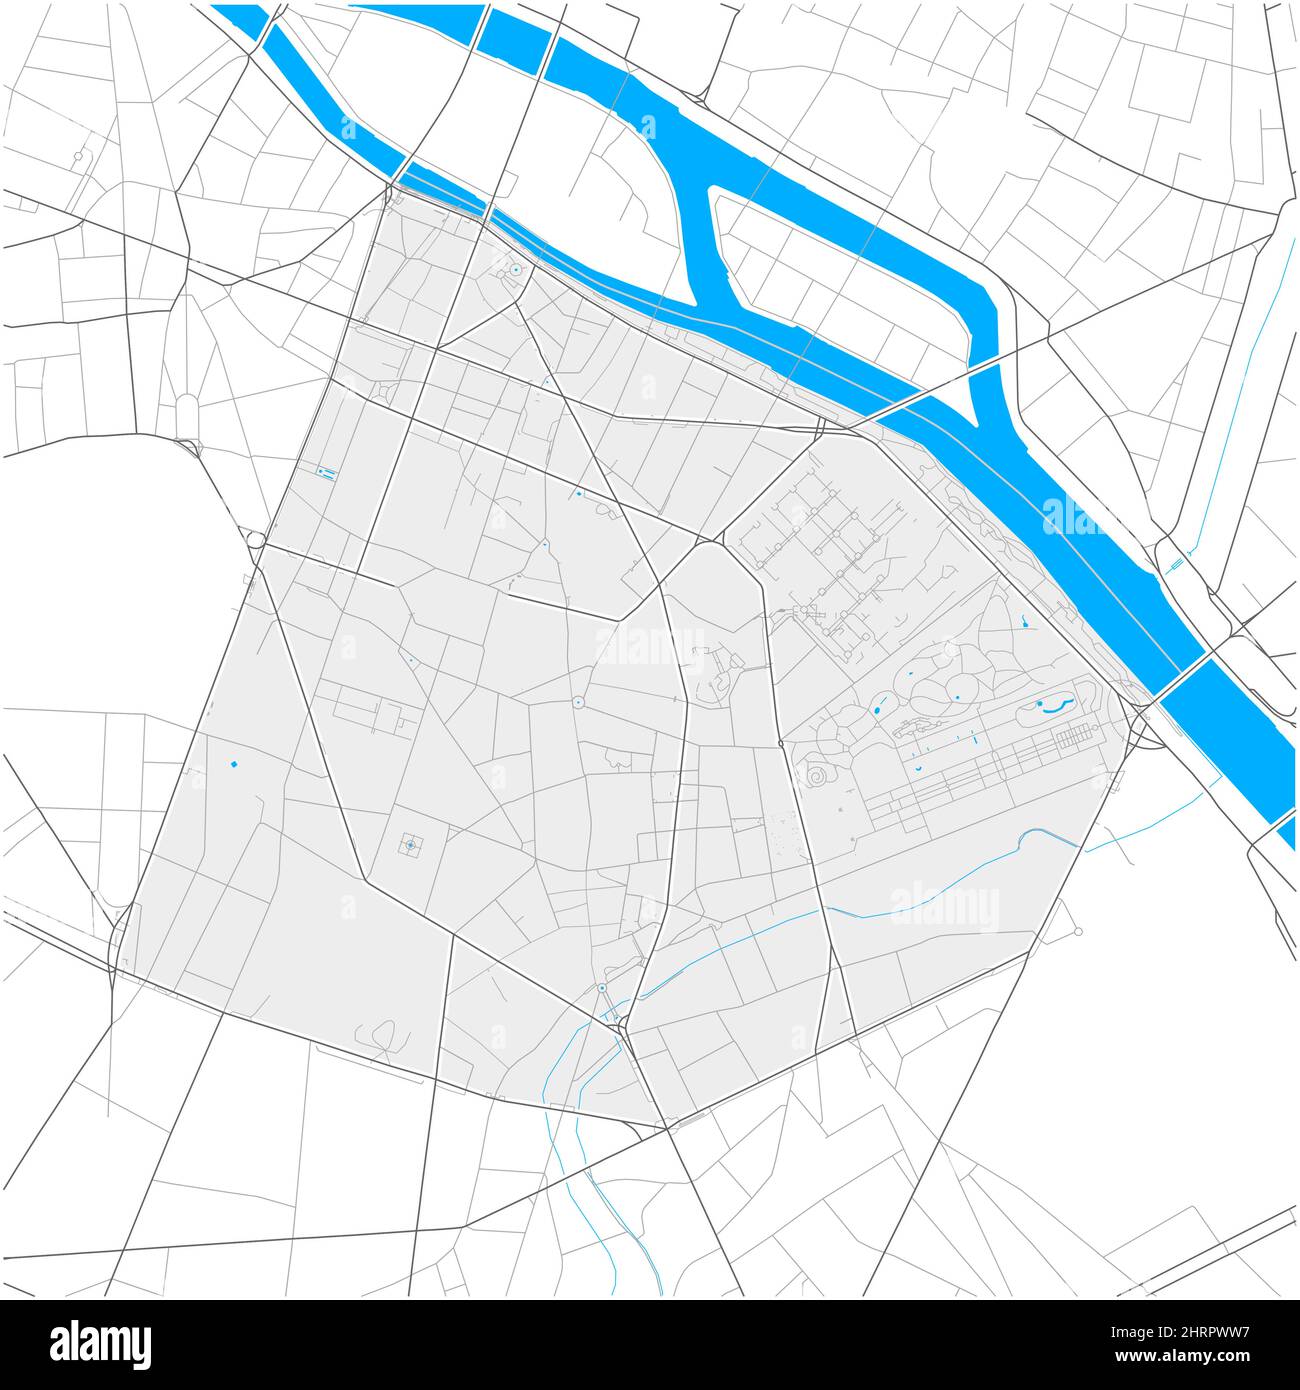 5th Arrondissement, Paris, FRANCE, high detail vector map with city boundaries and editable paths. White outlines for main roads. Many smaller paths. Stock Vector